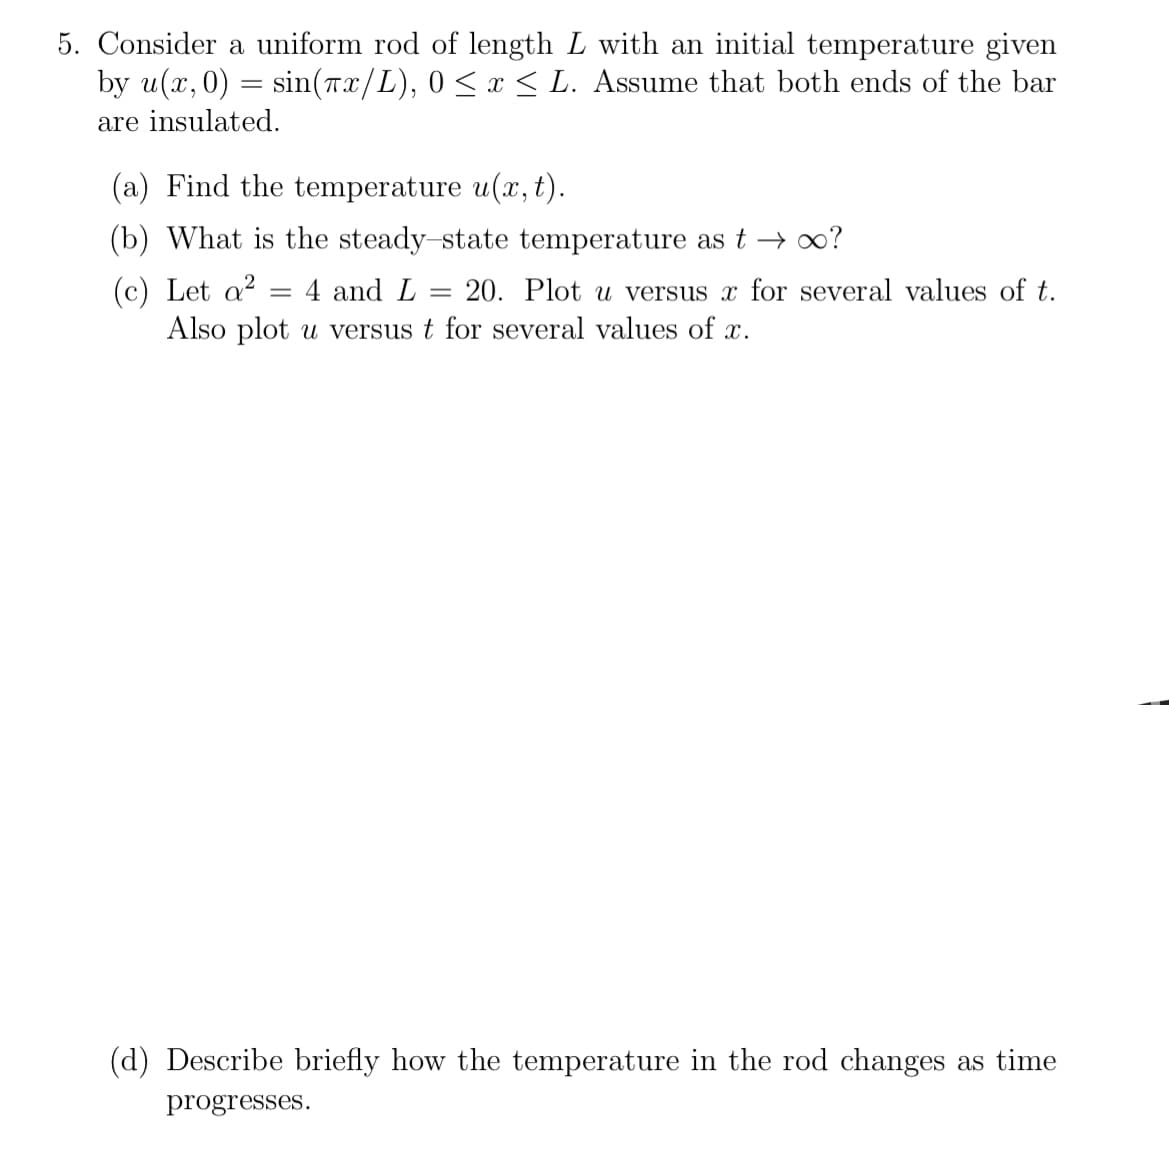 5. Consider a uniform rod of length L with an initial temperature given
by u(x,0)= sin(7x/L), 0 ≤ x ≤ L. Assume that both ends of the bar
are insulated.
(a) Find the temperature u(x, t).
(b) What is the steady-state temperature as t→ ∞?
(c) Let a²
4 and L = 20. Plot u versus x for several values of t.
Also plot u versus t for several values of x.
=
(d) Describe briefly how the temperature in the rod changes as time
progresses.